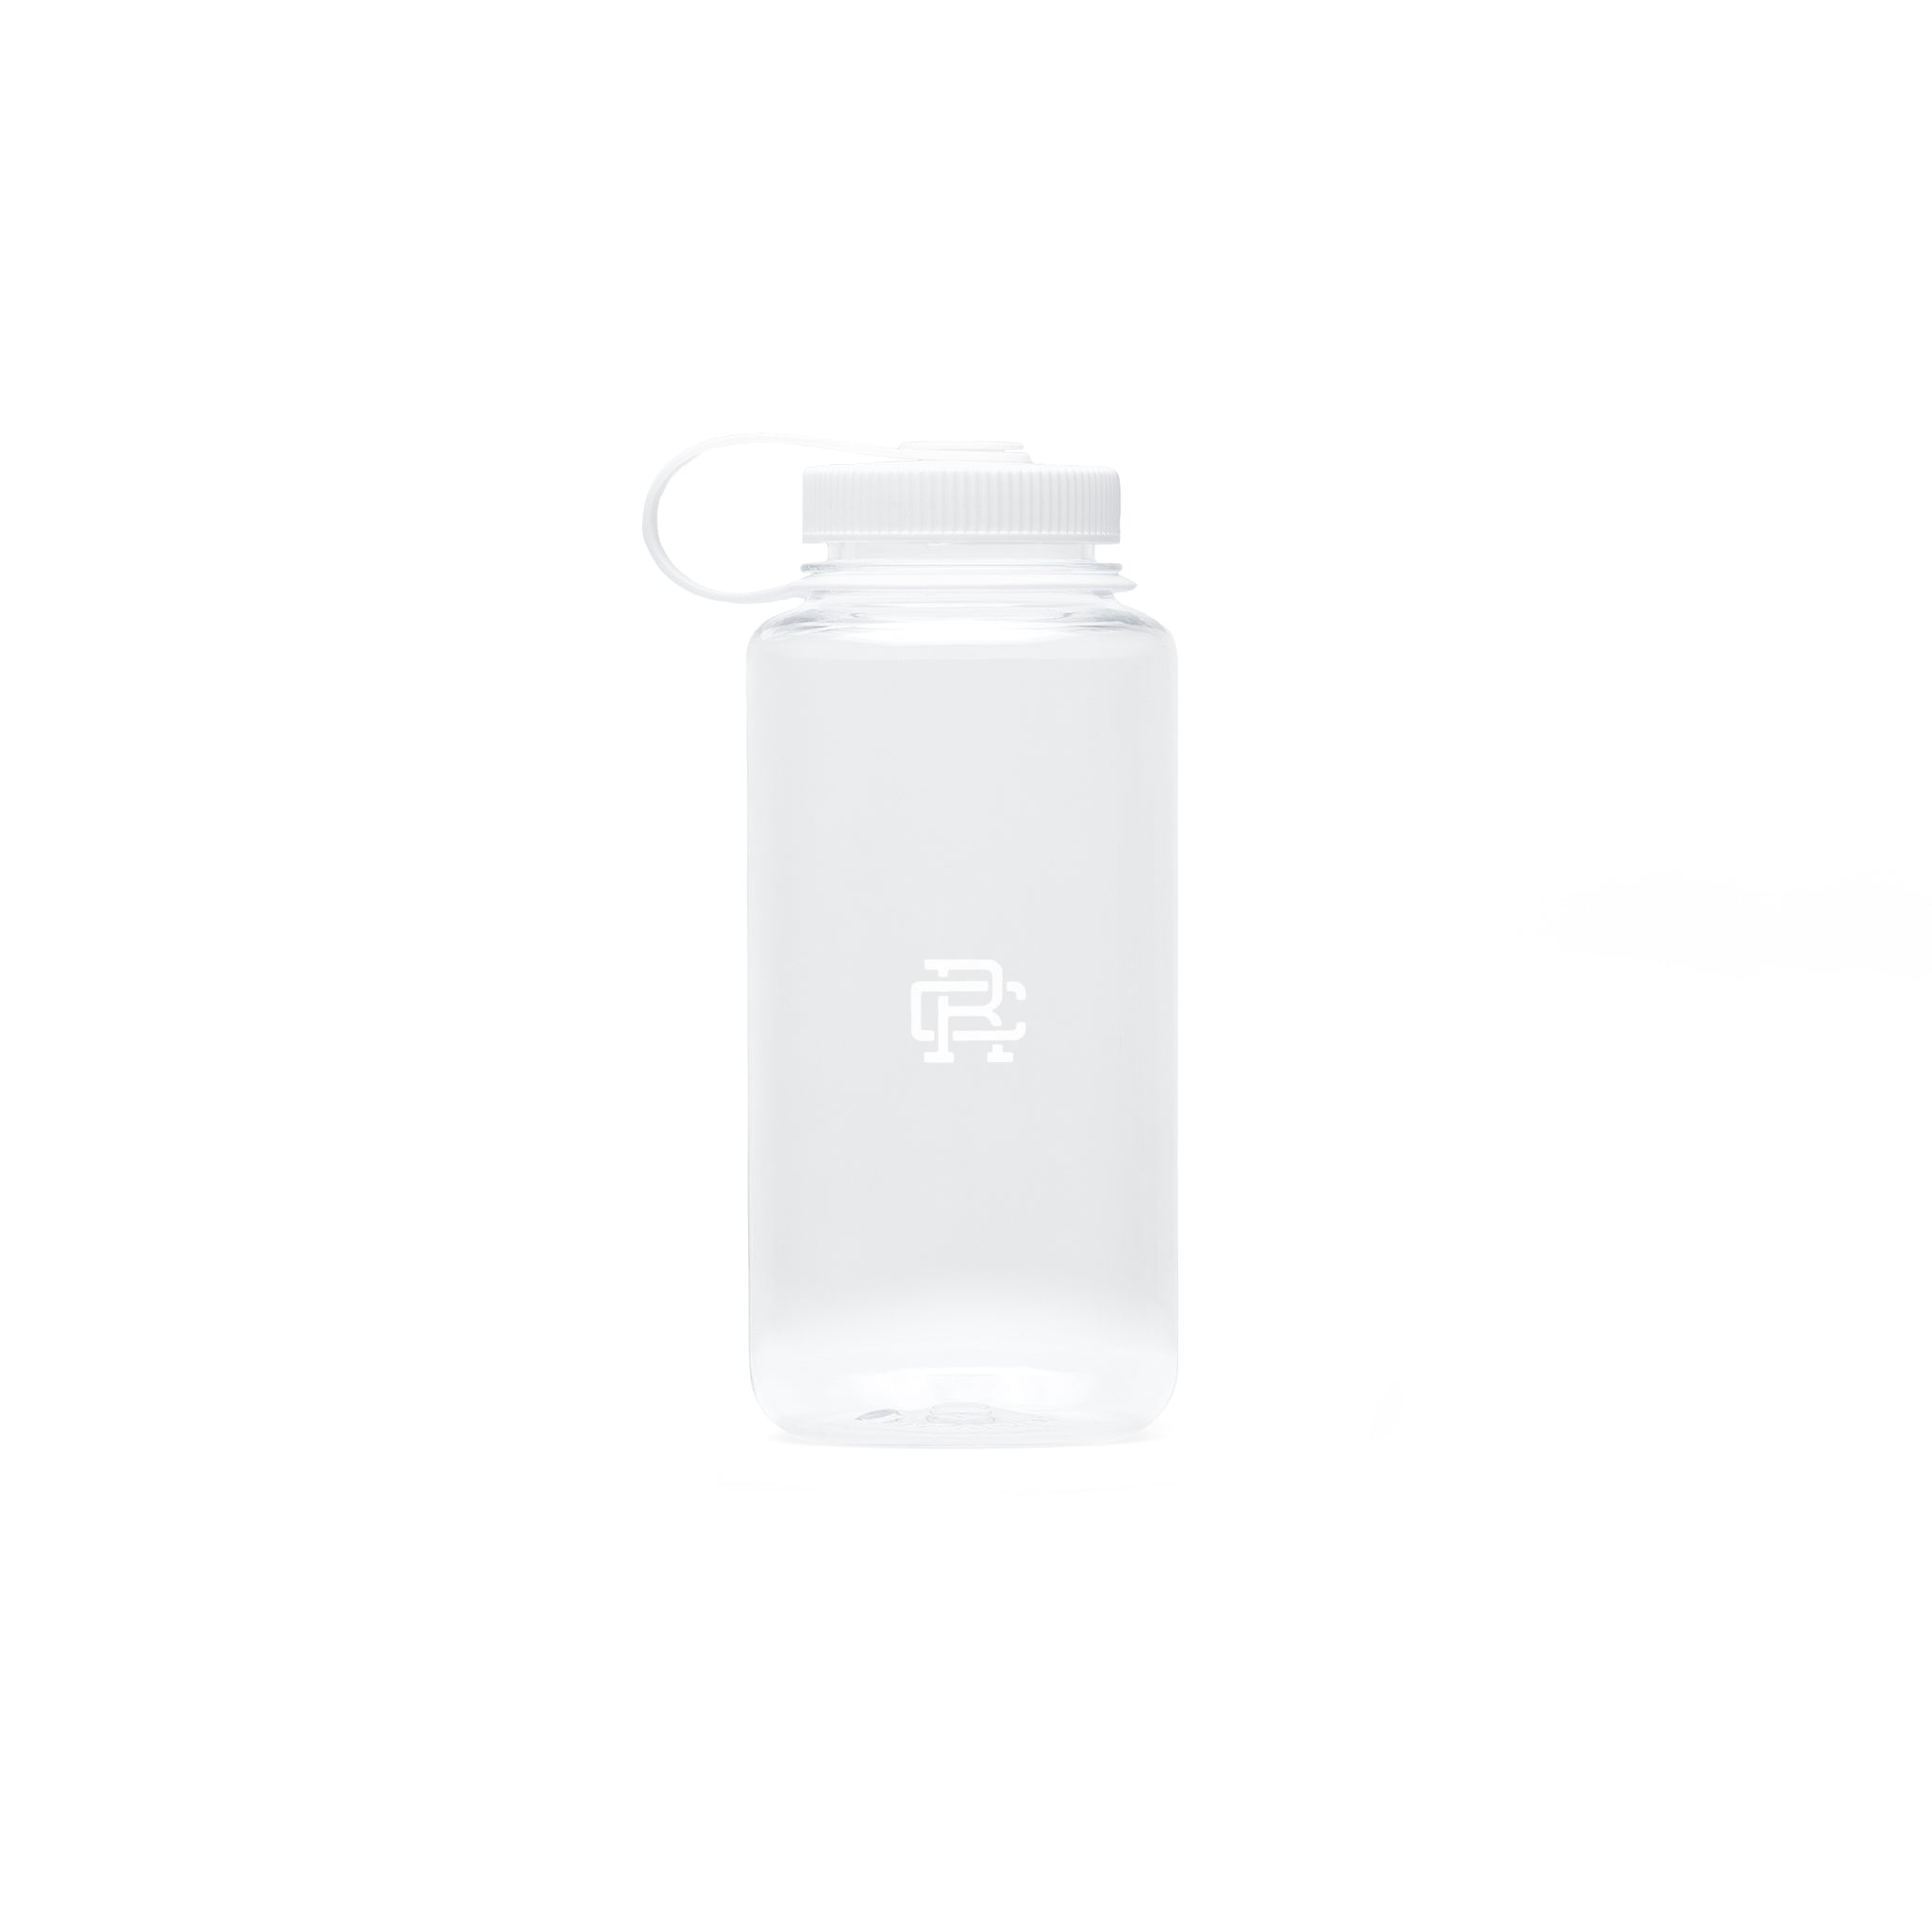 Reigning Champ Water Bottle